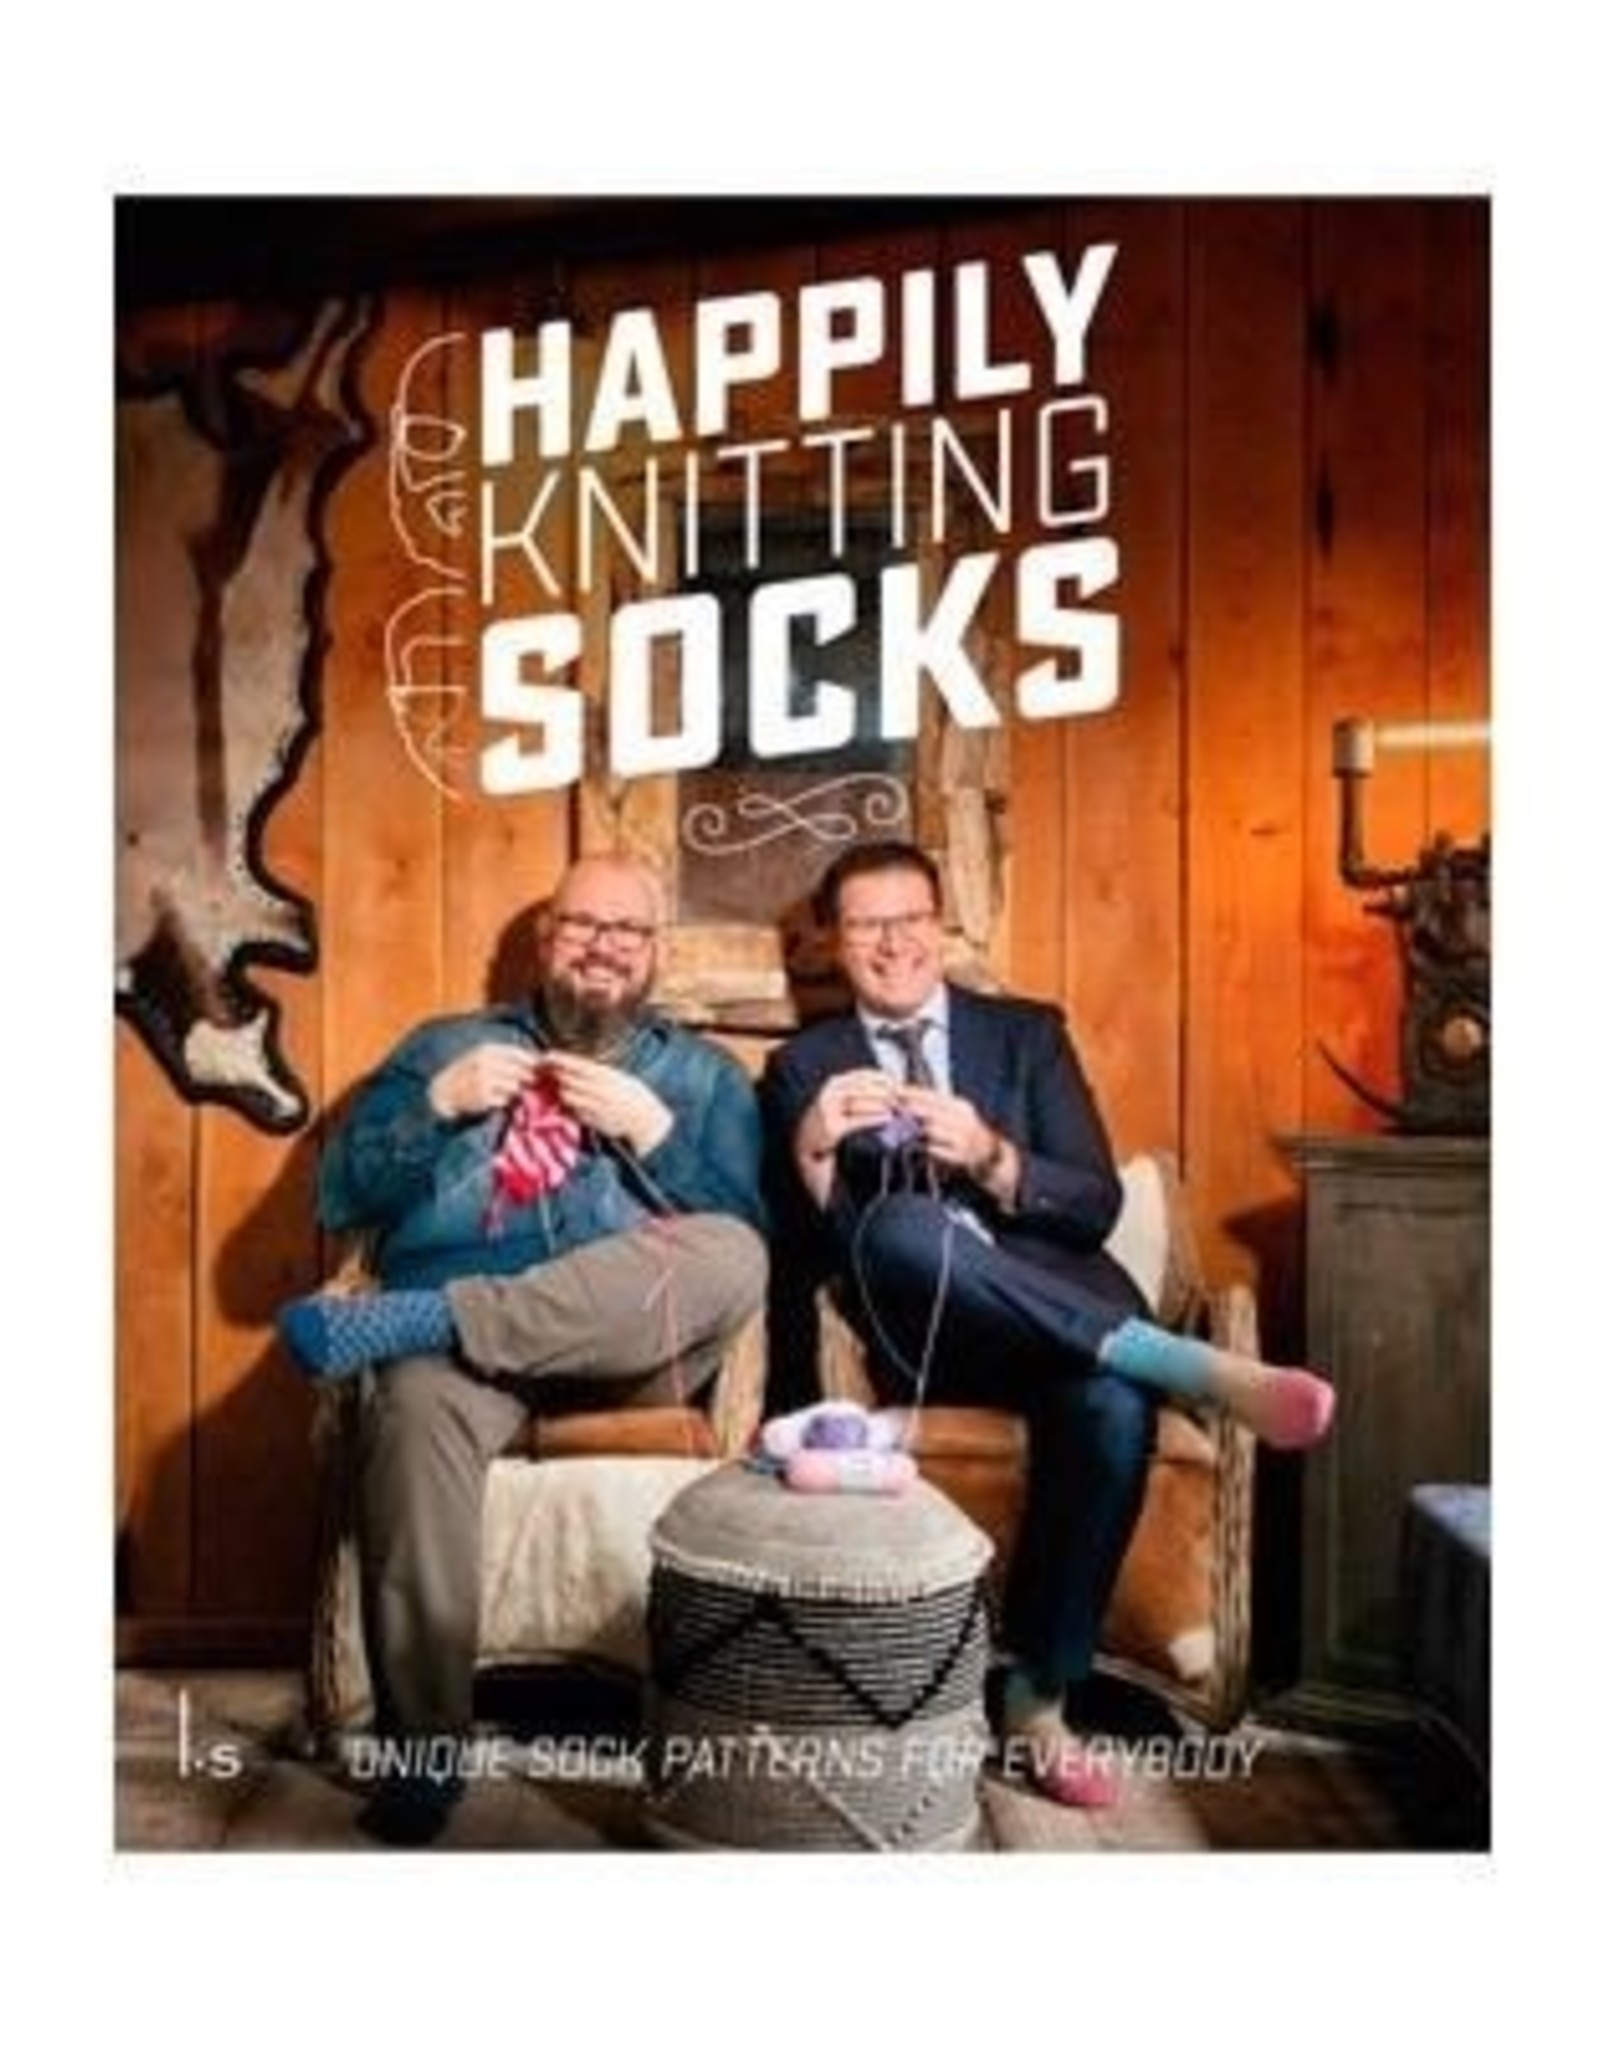 Happily Knitting Socks: Unique Sock Patterns for Everybody by Mr. Knitbear & DenDennis